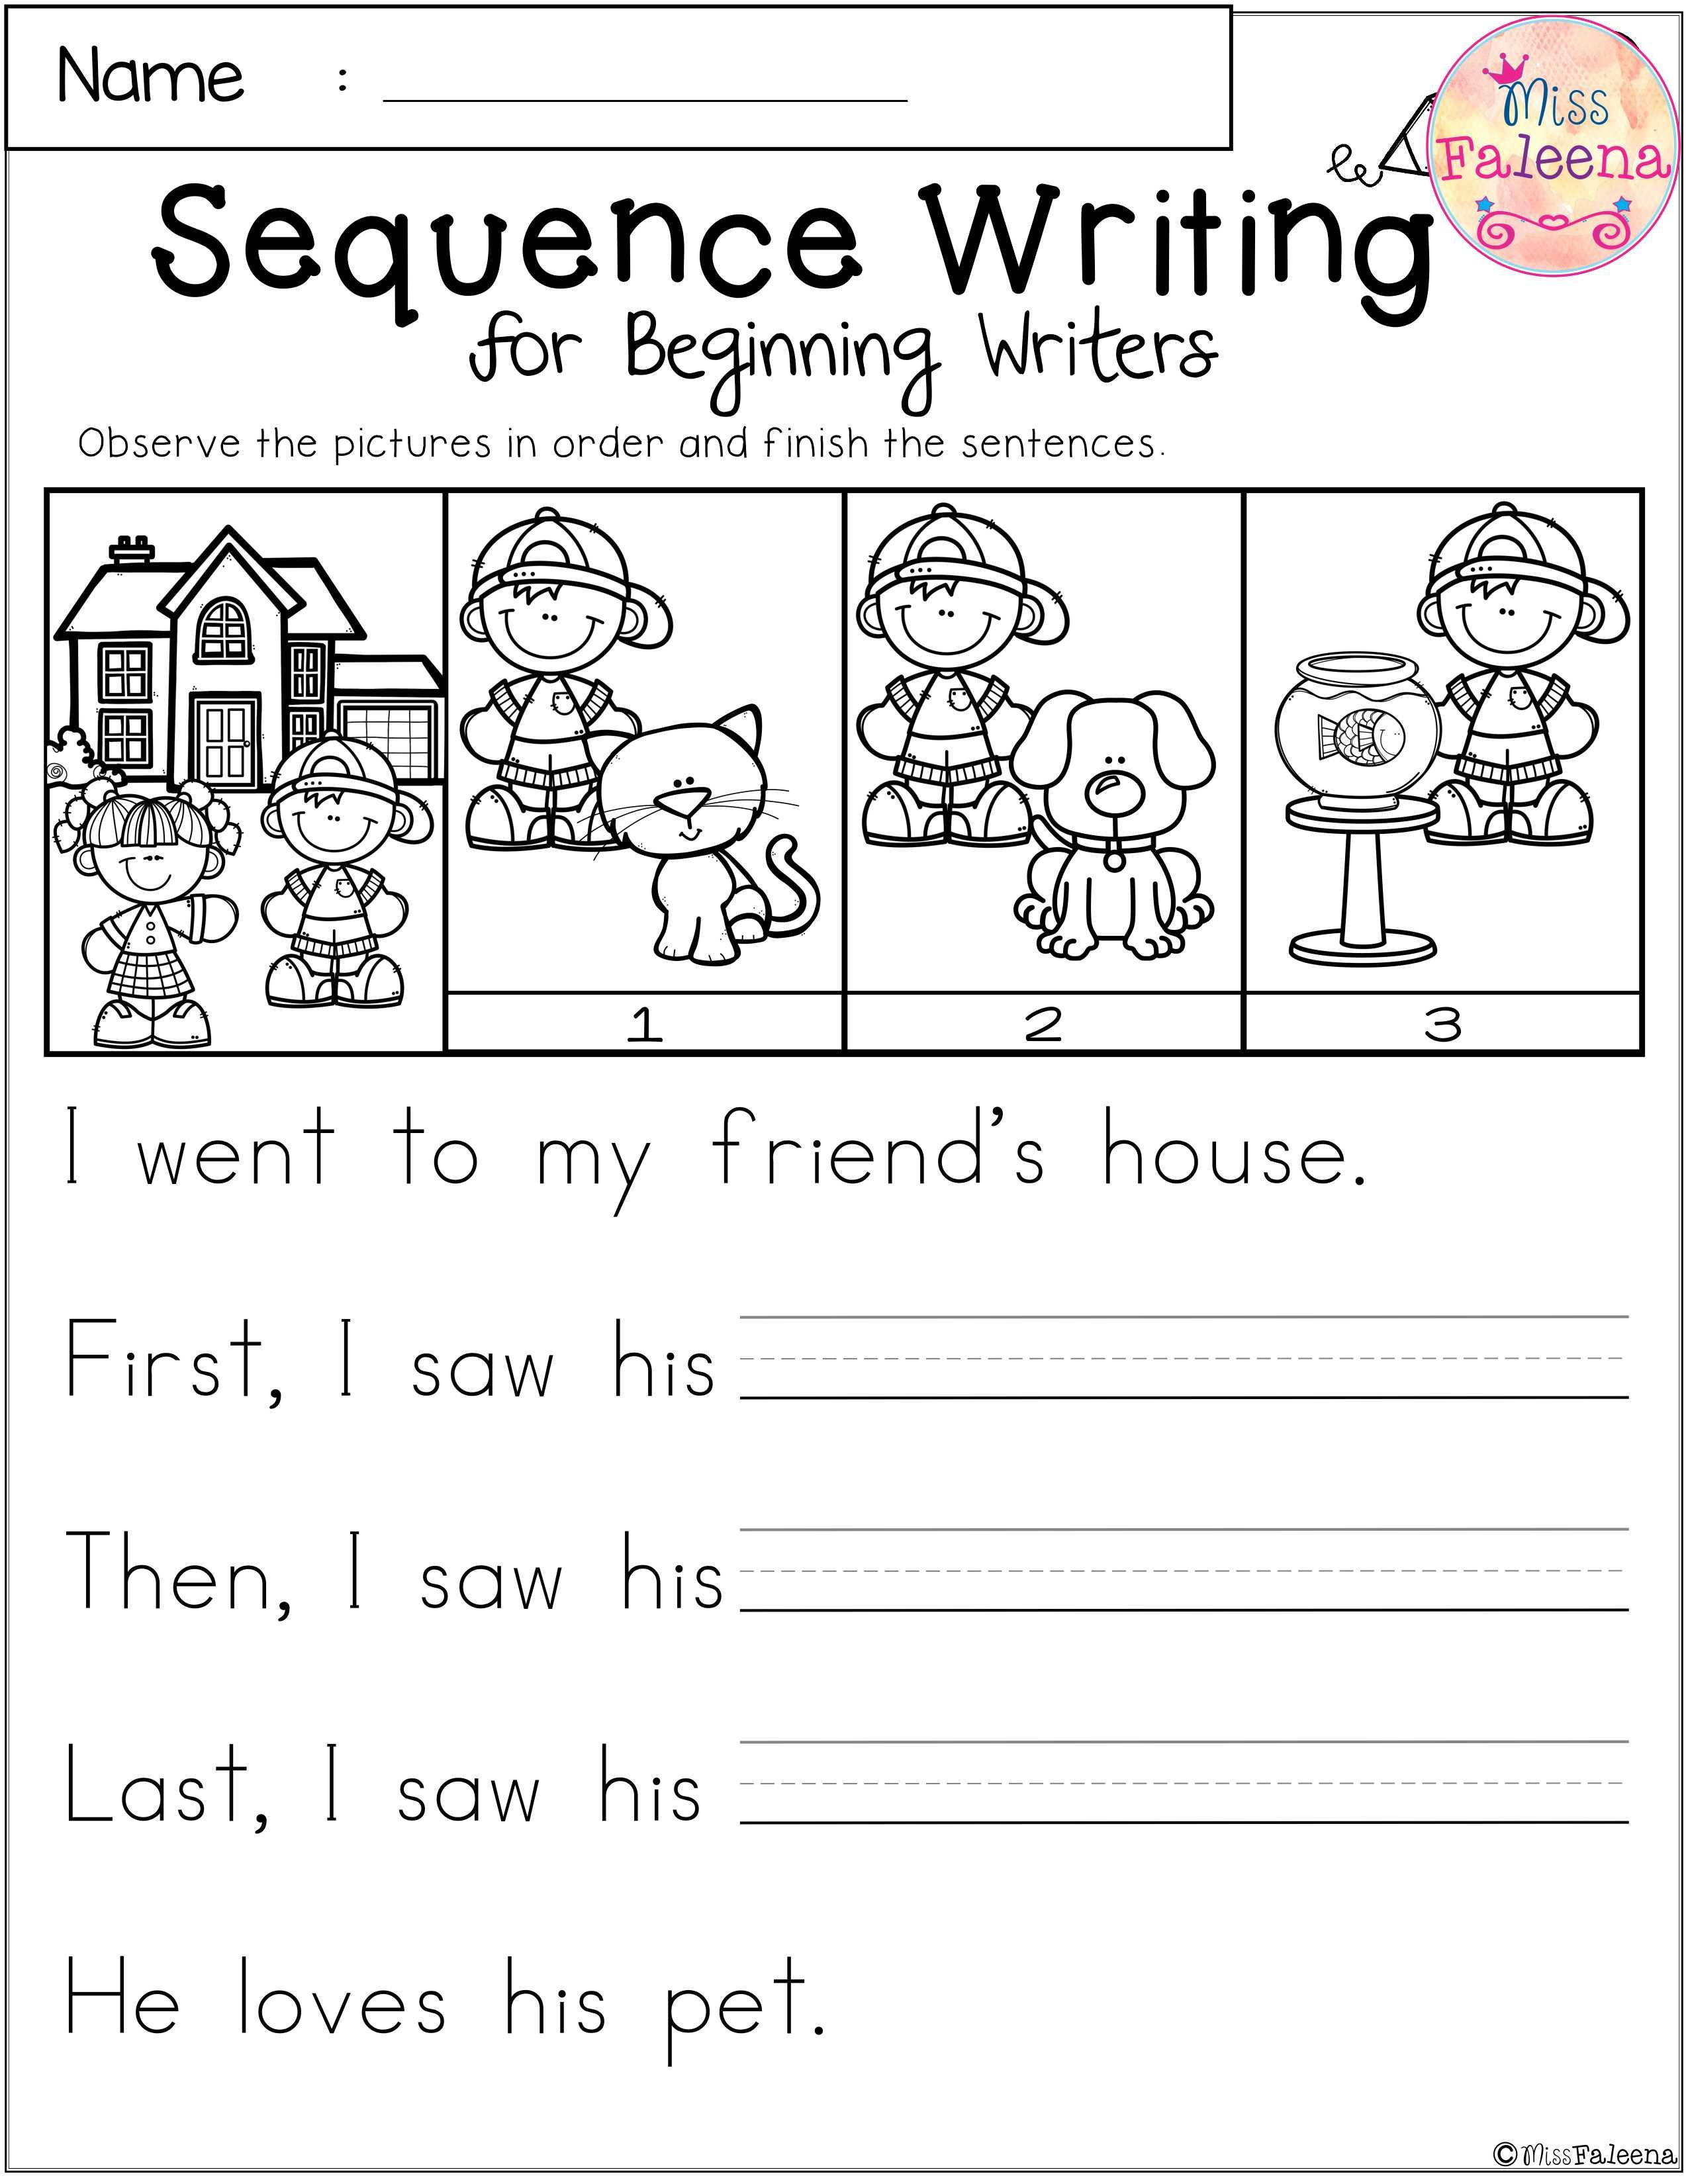 Sequencing events Worksheets Grade 6 Free Sequence Writing for Beginning Writers with Images